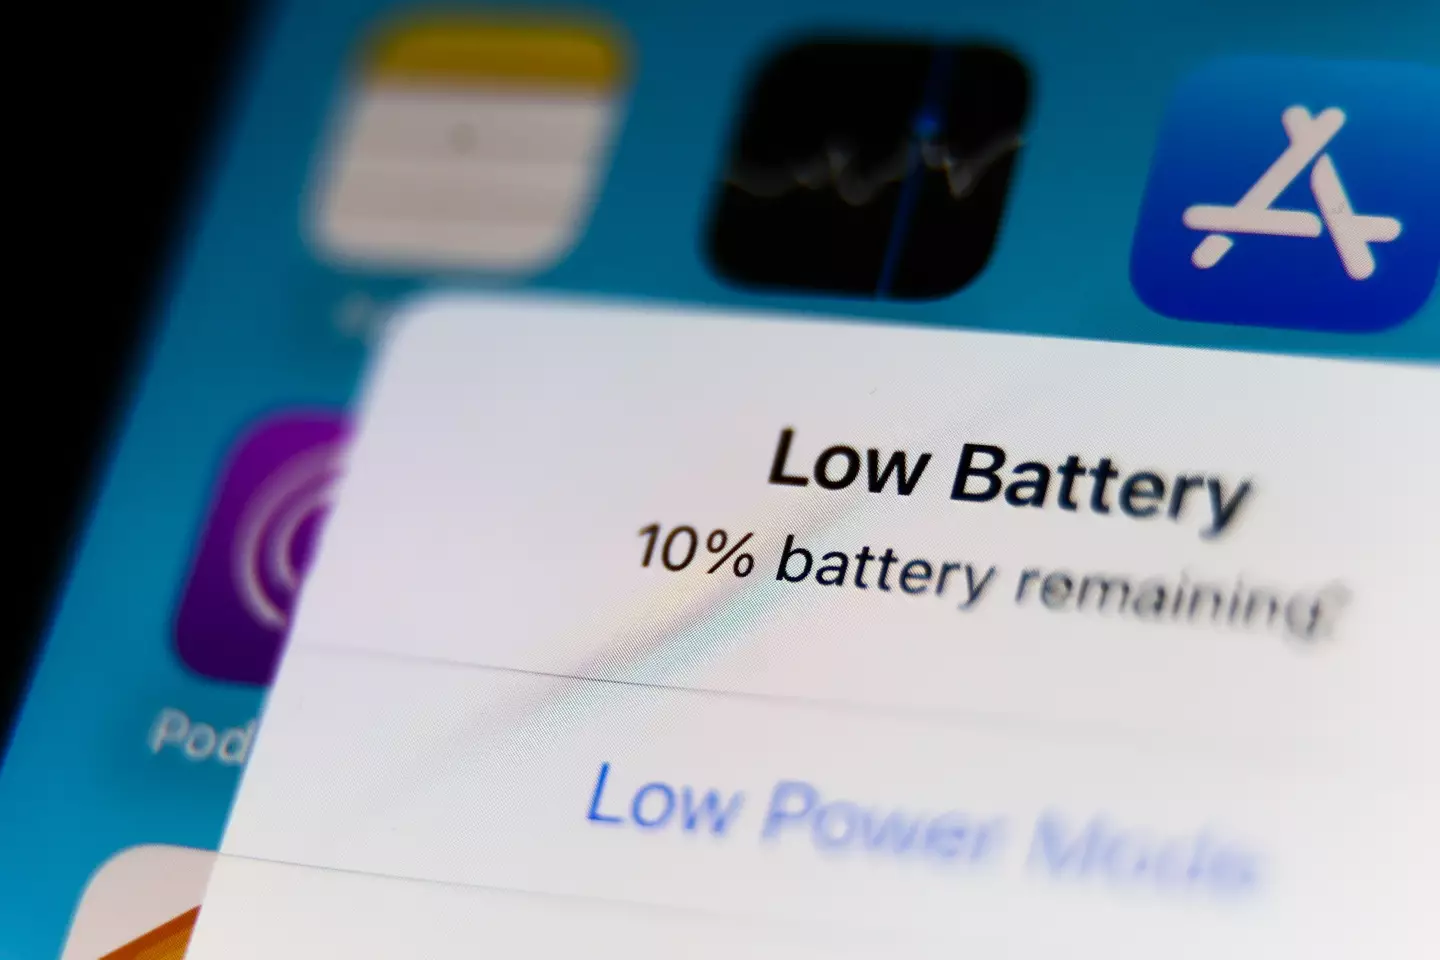 There are some handy tips for saving your iPhone battery life.